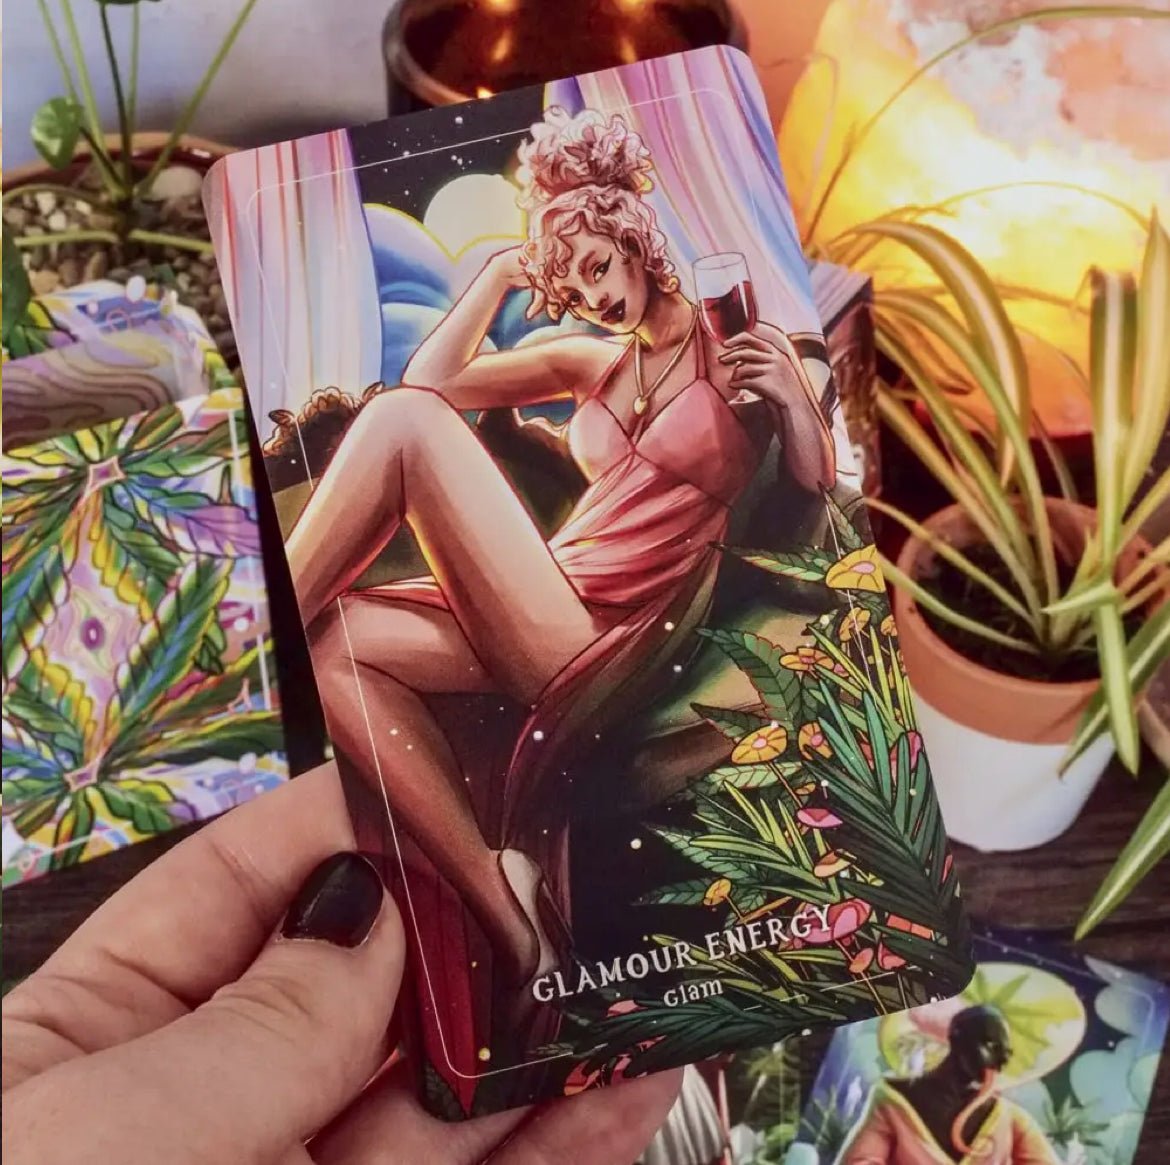 ‘Metaphysical Cannabis’ Oracle Deck - EcoLuxe Furnishings